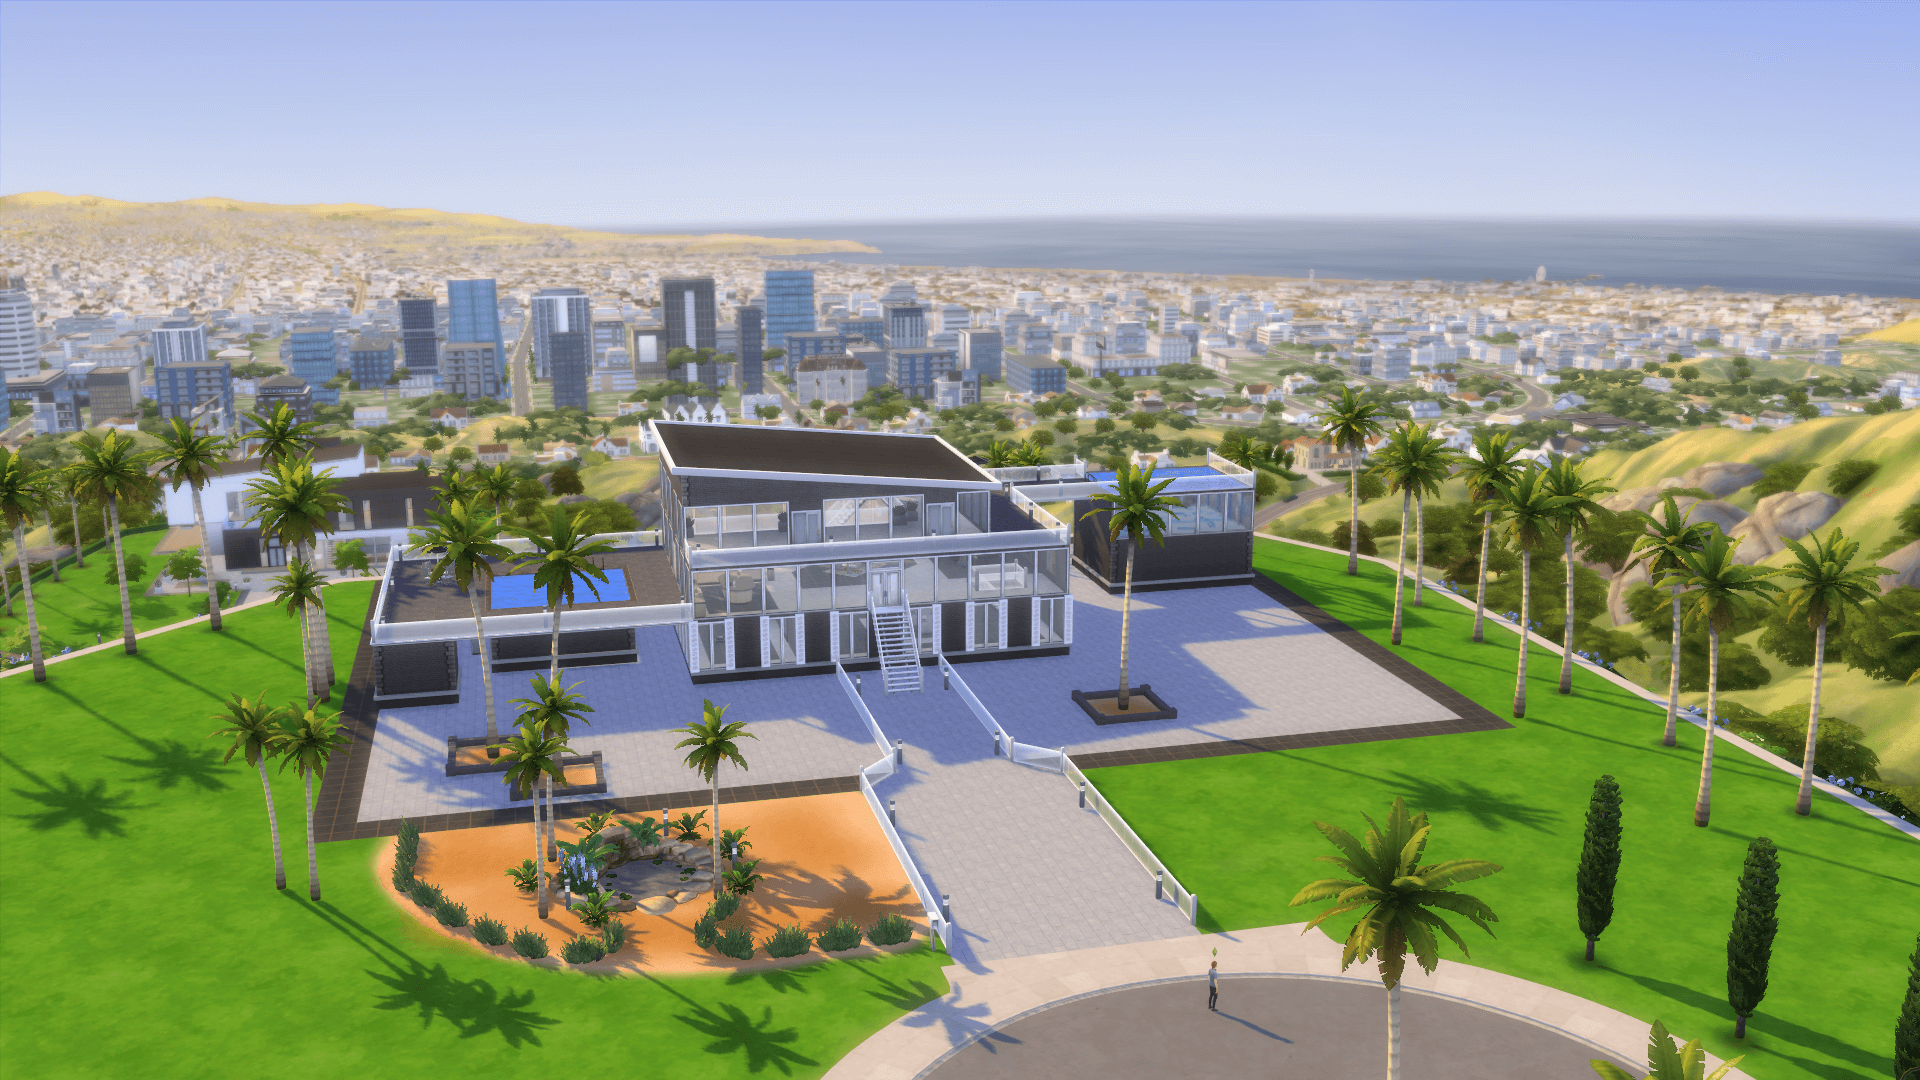 sims 4 get famous mansions